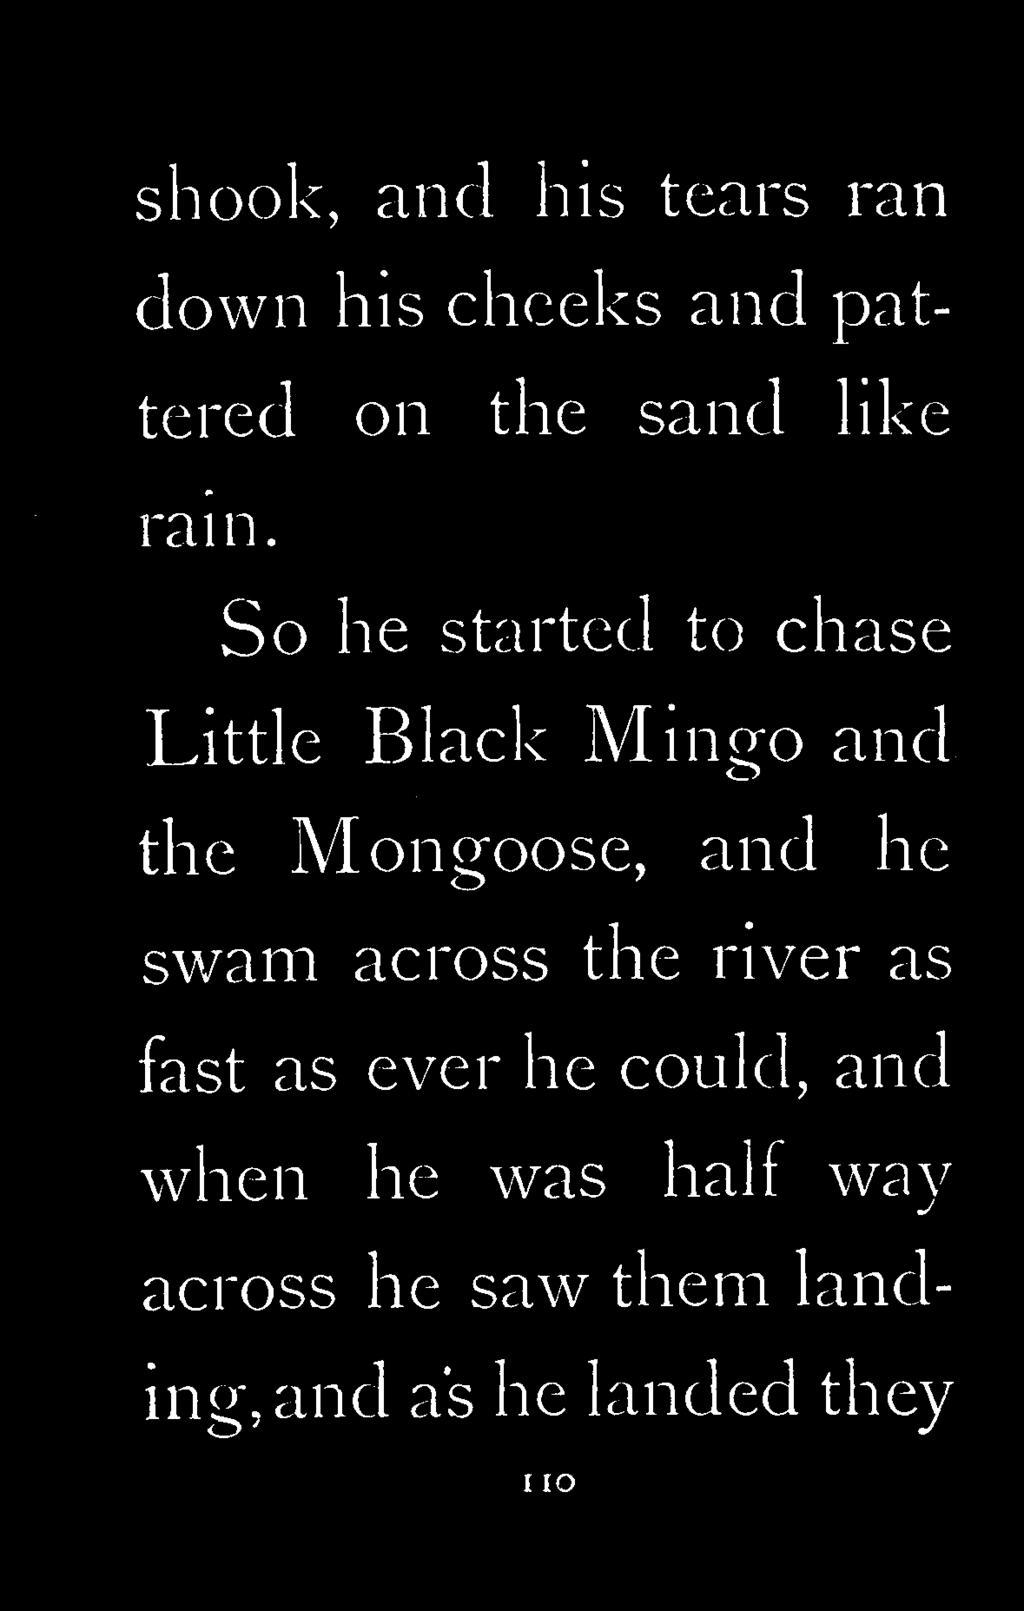 So he started to chase Little Black Mingo and the Mongoose, and he